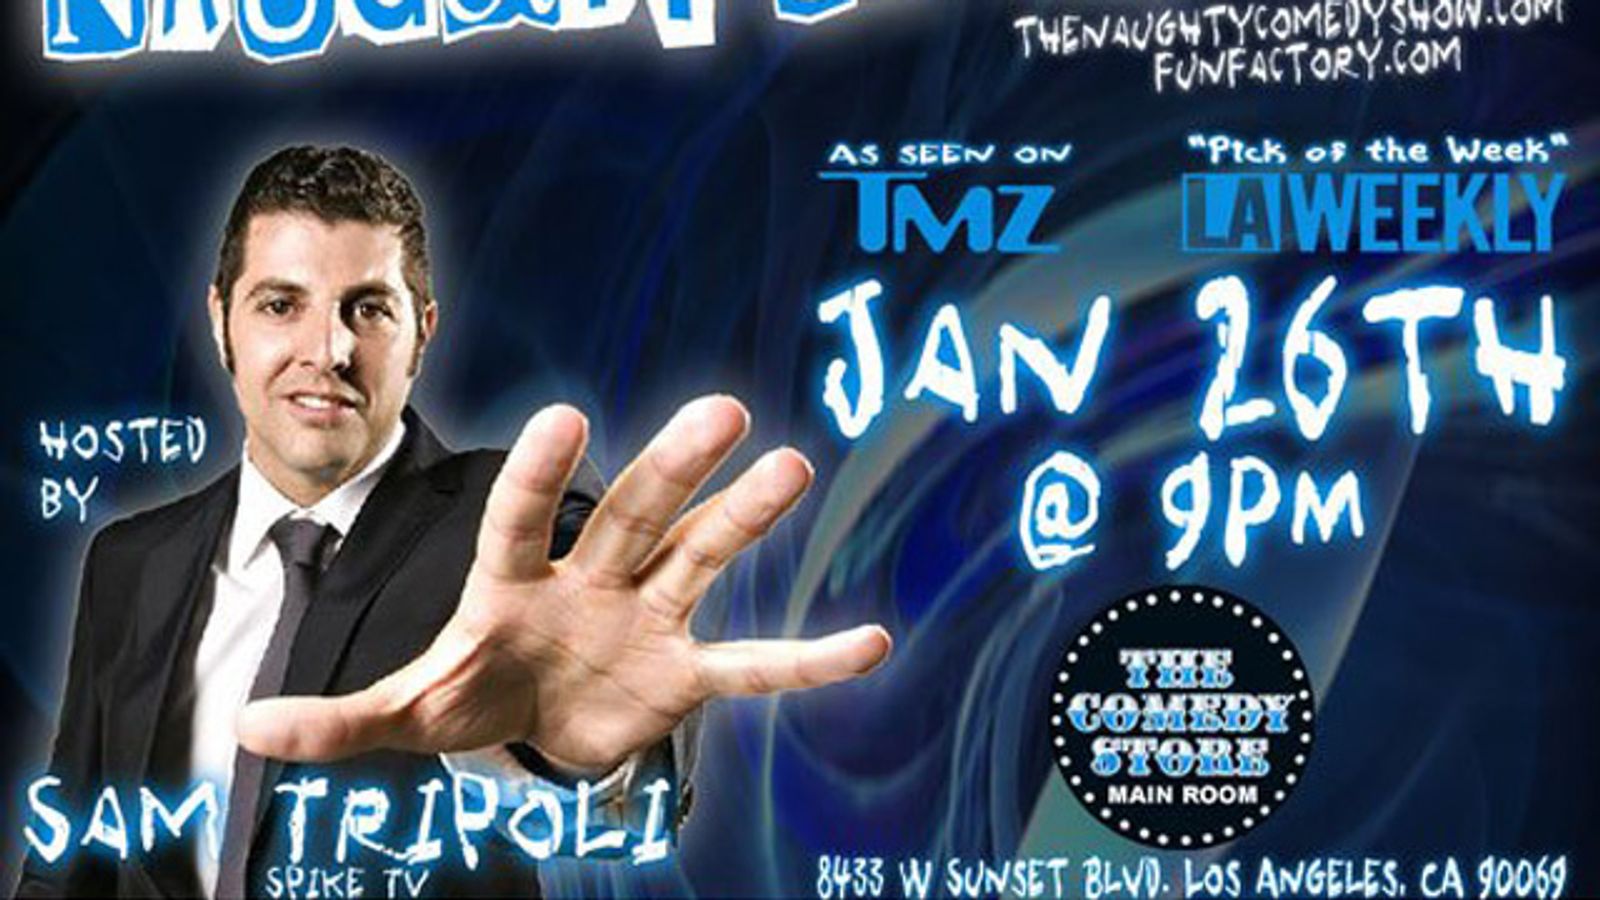 Sam Tripoli Presents Naughty on Ice 3D Thursday at The Comedy Store